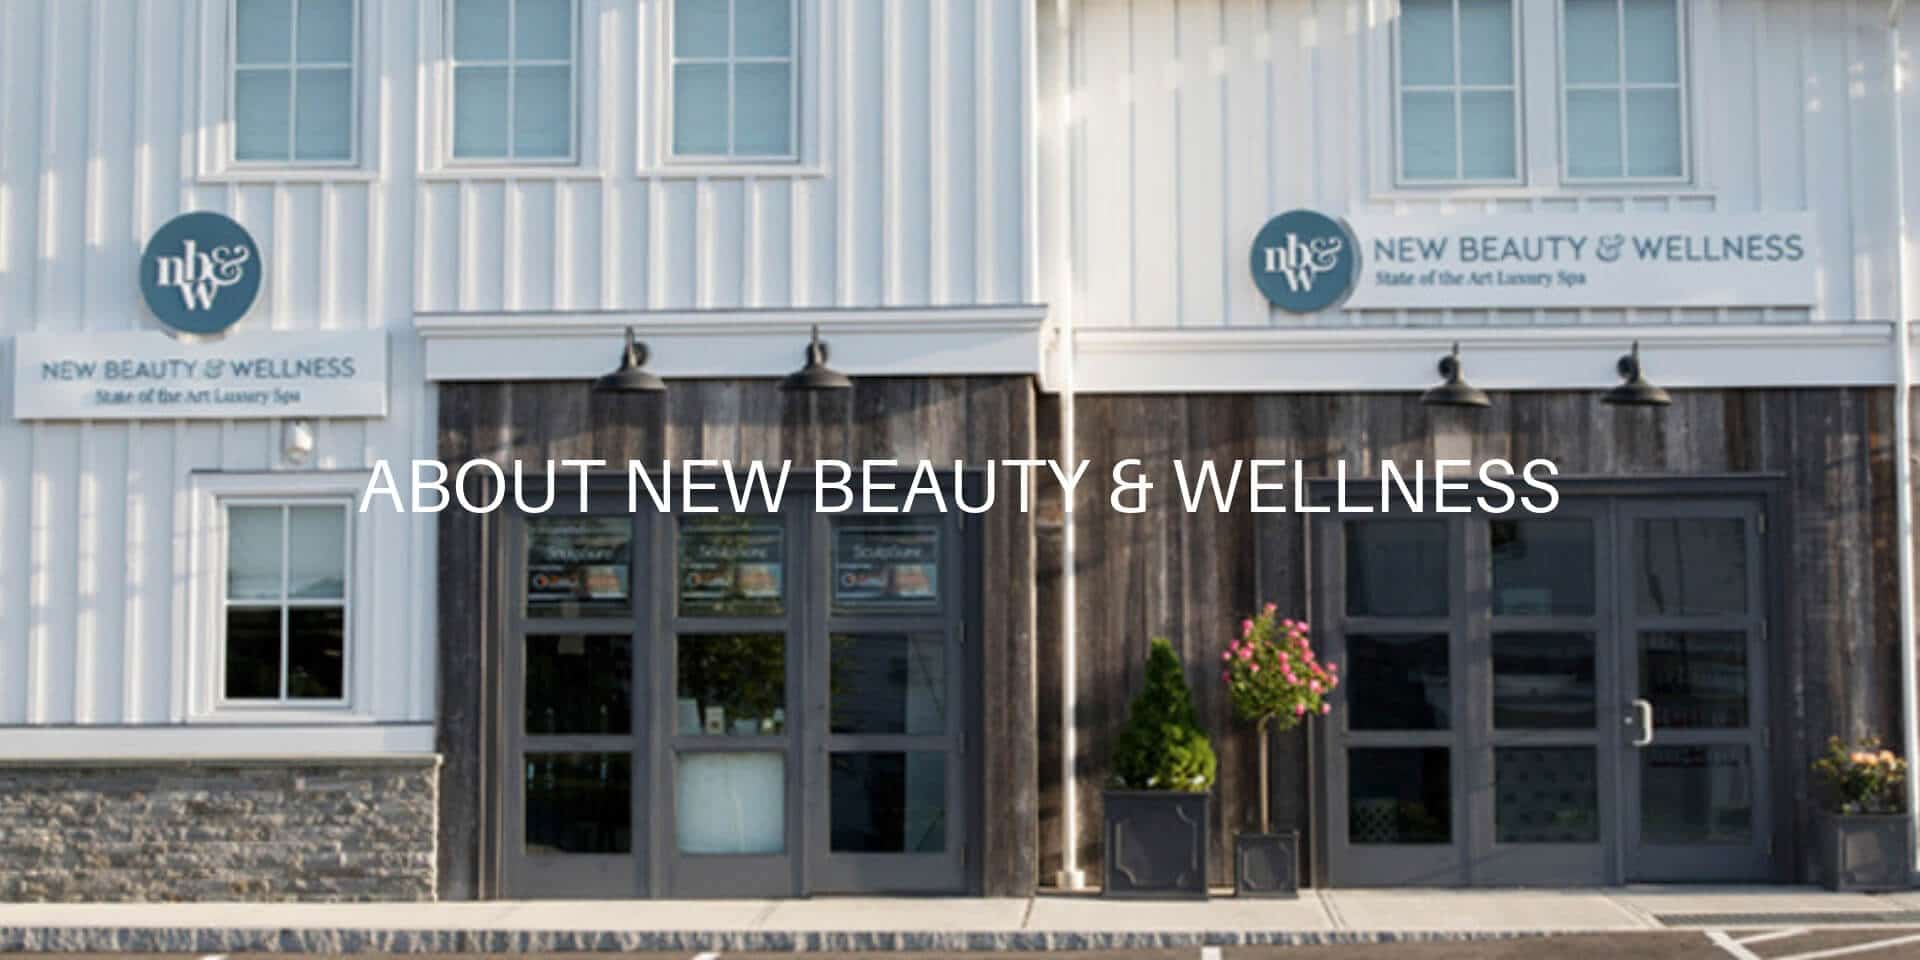 Lear about new beauty & wellness.